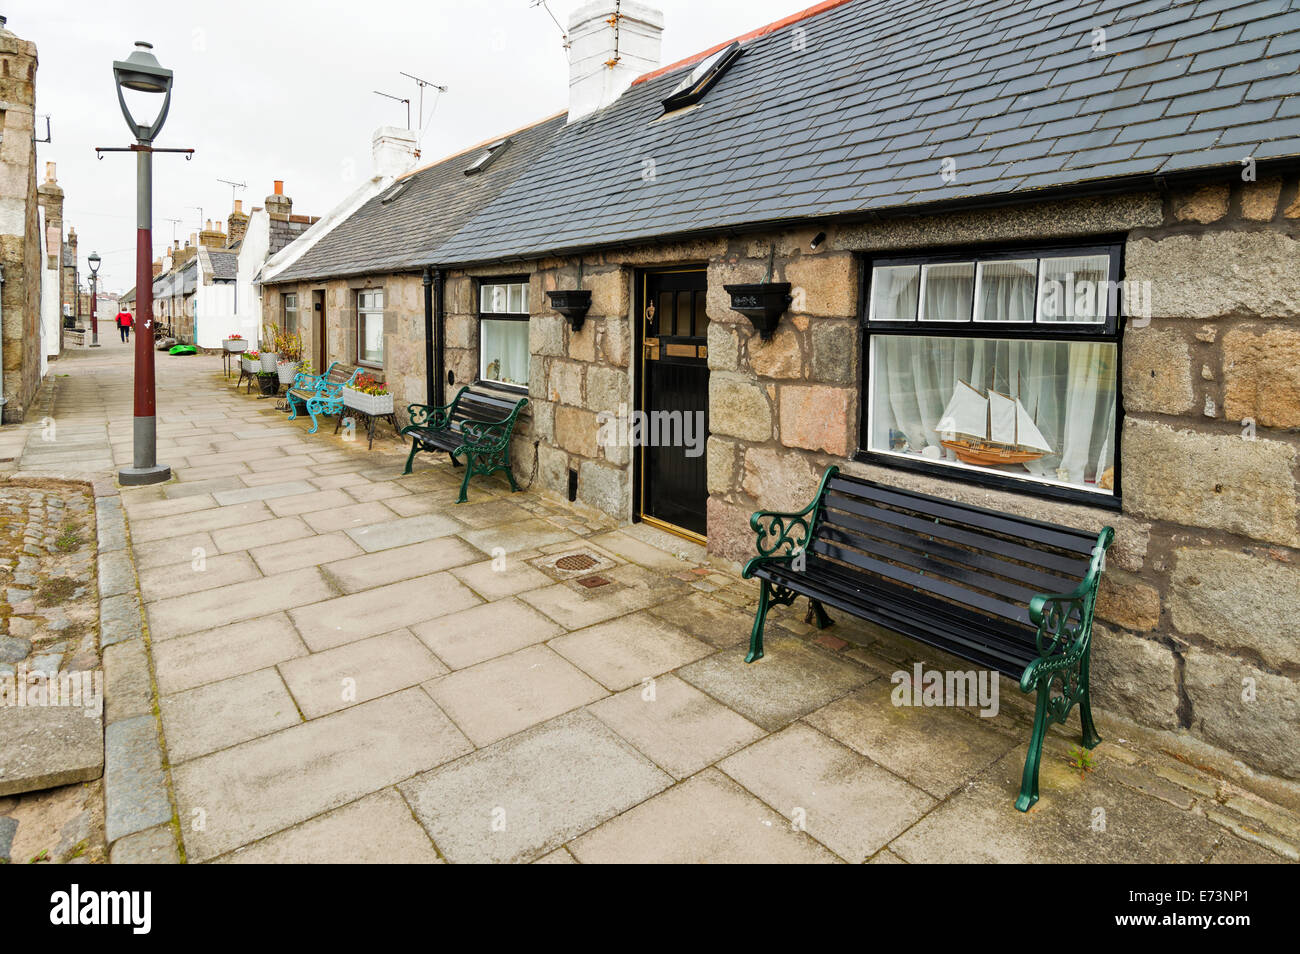 FOOTDEE OR FISHING VILLAGE IN ABERDEEN HARBOUR A ROW OF TYPICAL HOUSES IN THIS CONSERVATION AREA Stock Photo